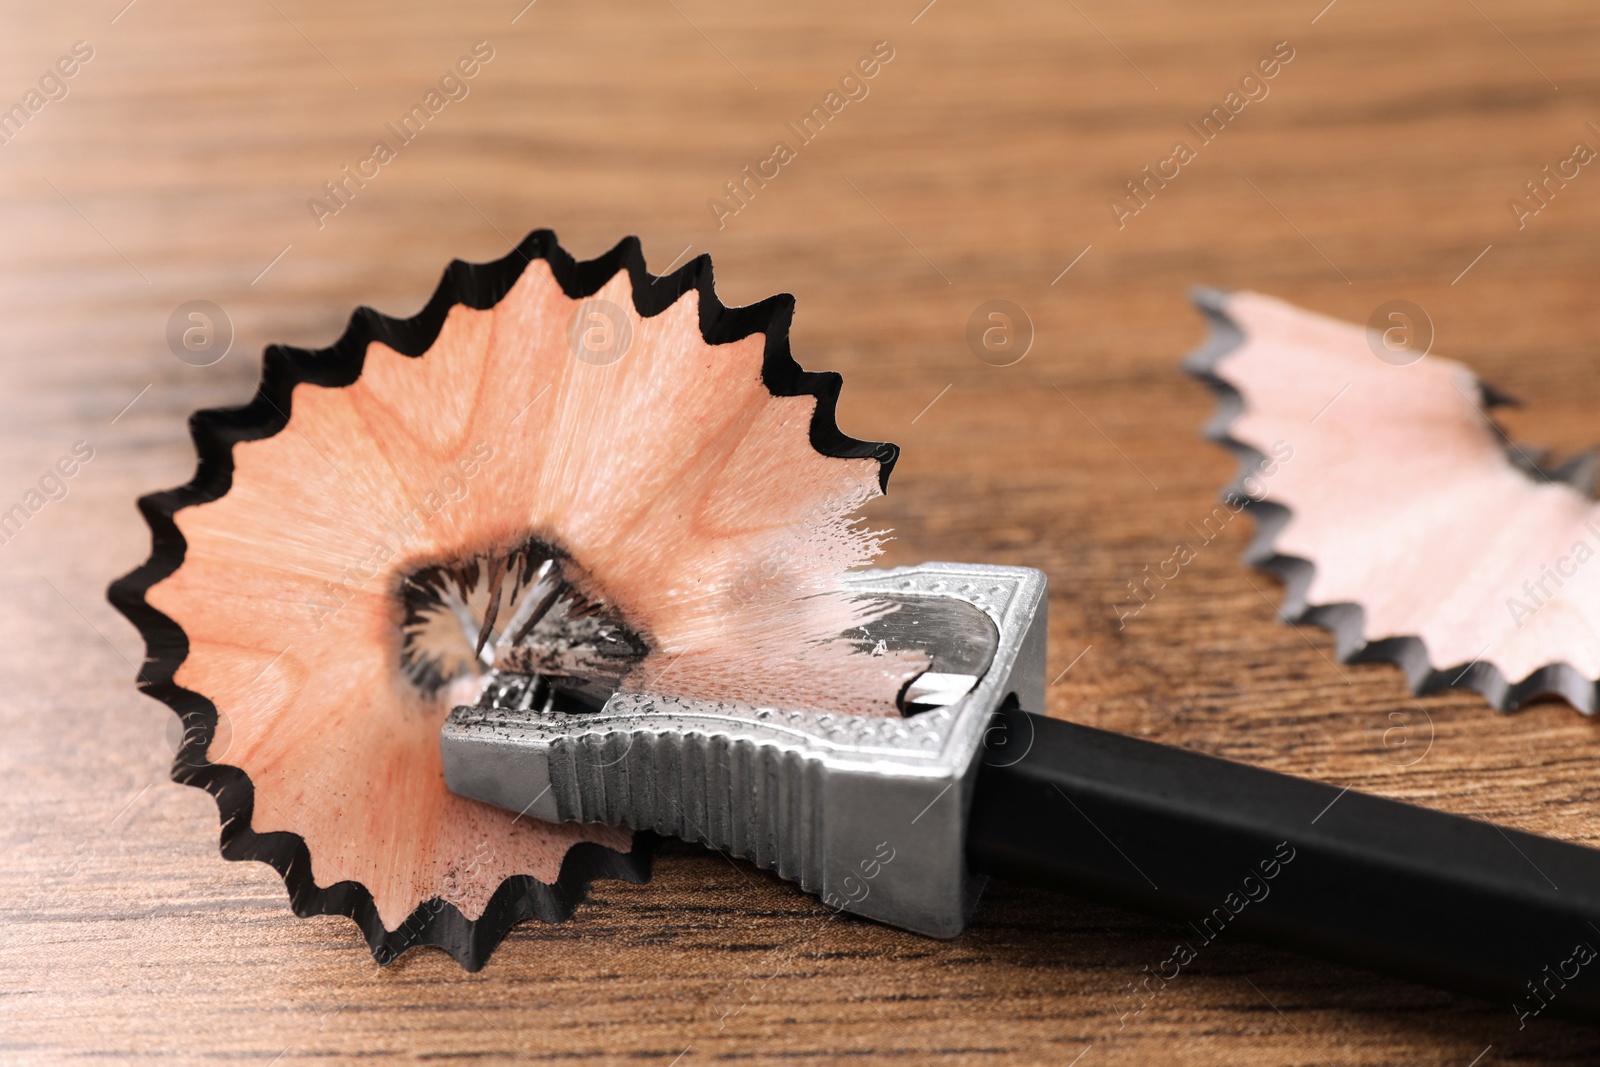 Photo of Metal sharpener with pencil shavings on wooden table, closeup